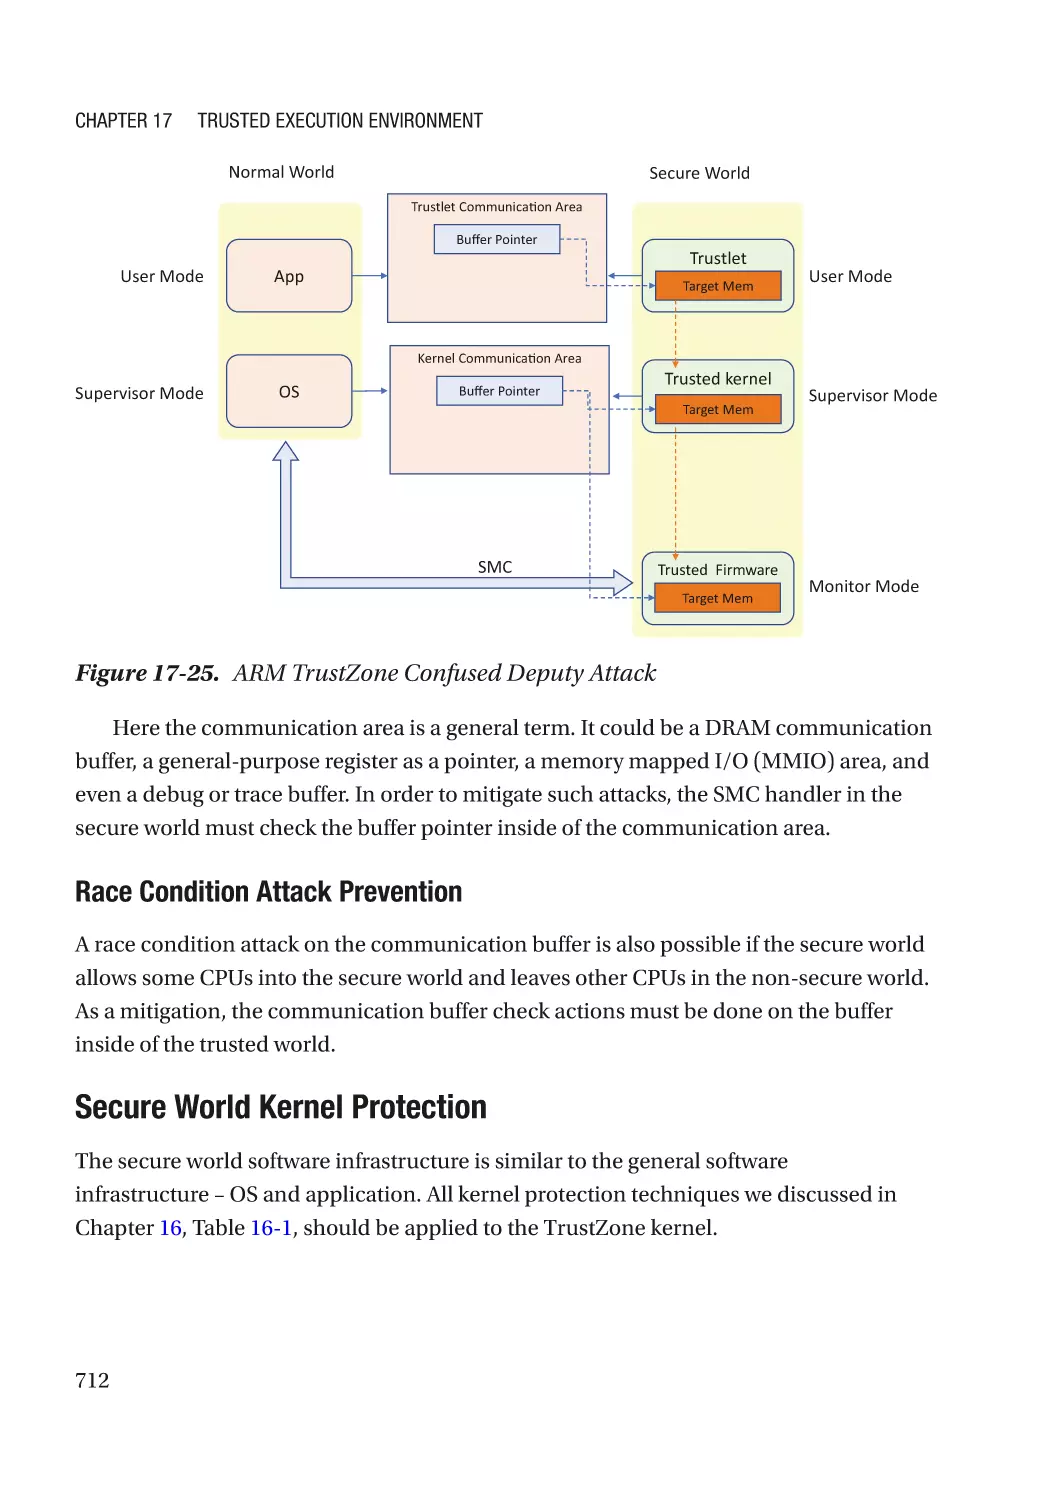 Race Condition Attack Prevention
Secure World Kernel Protection